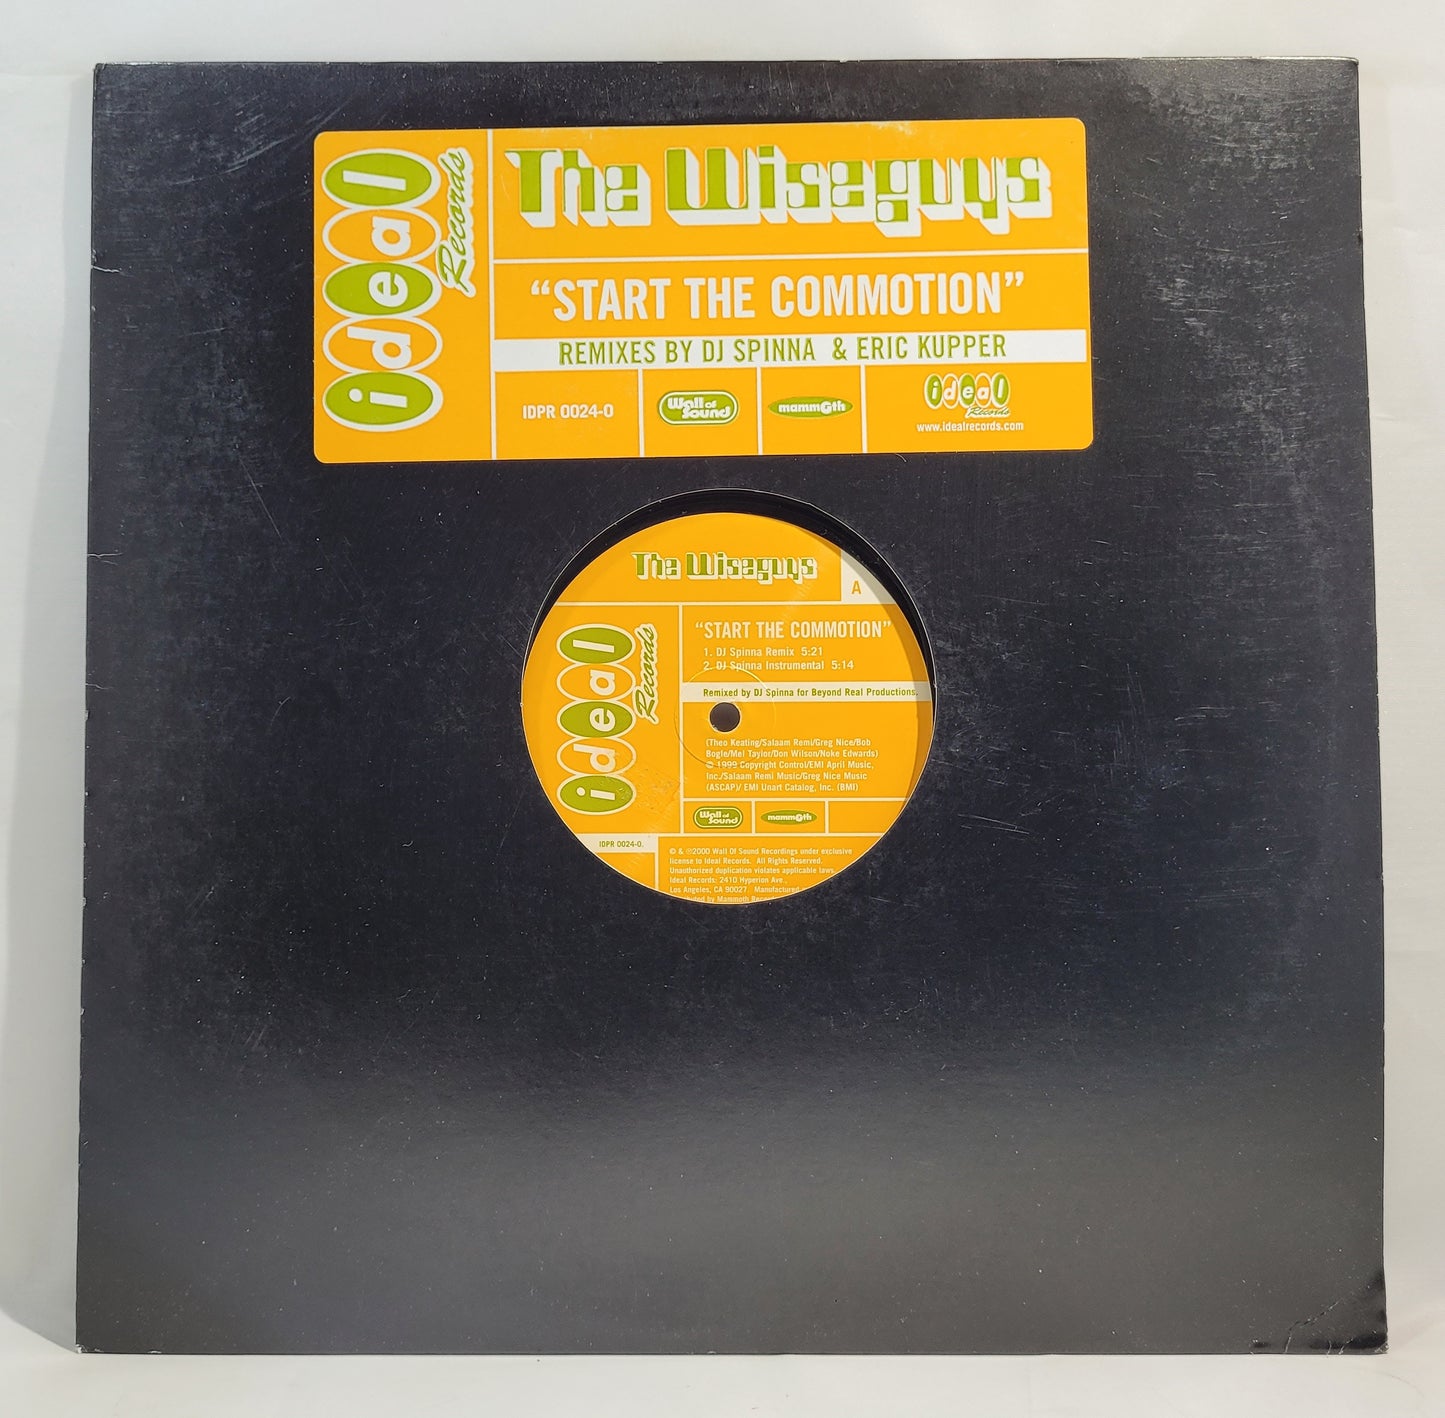 The Wiseguys - Start the Commotion [Vinyl Record 12" Single]